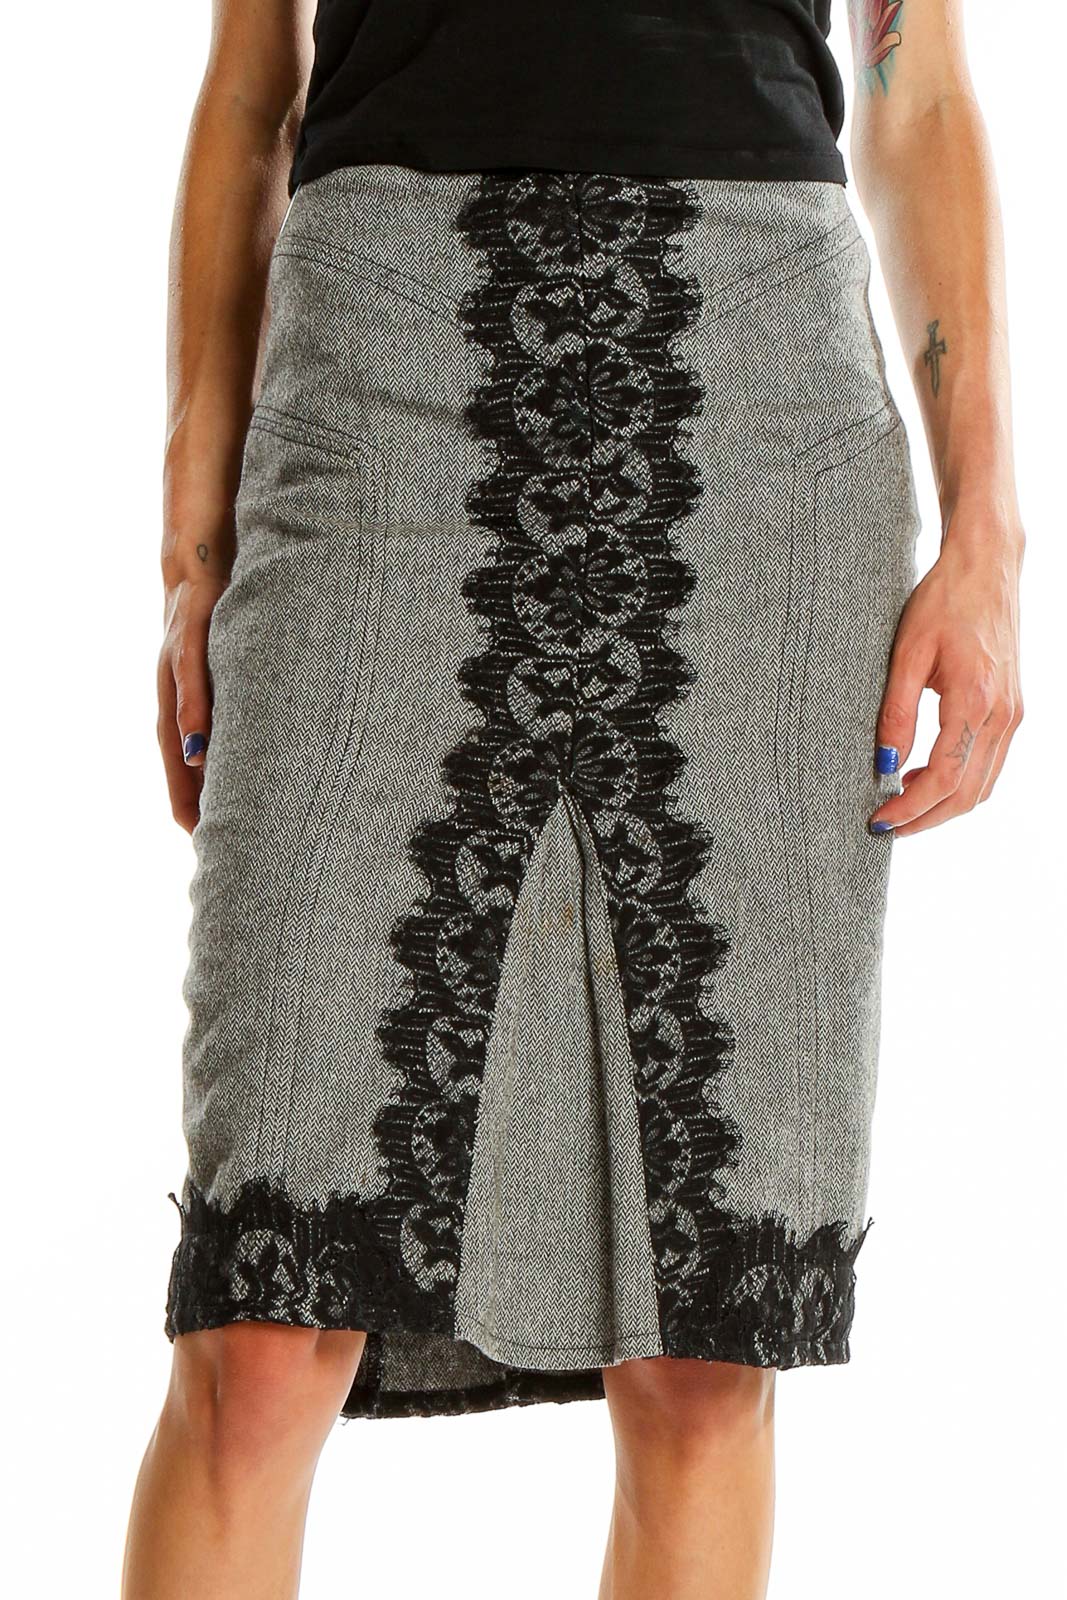 Gray Black Lace Chic Pencil Skirt Front